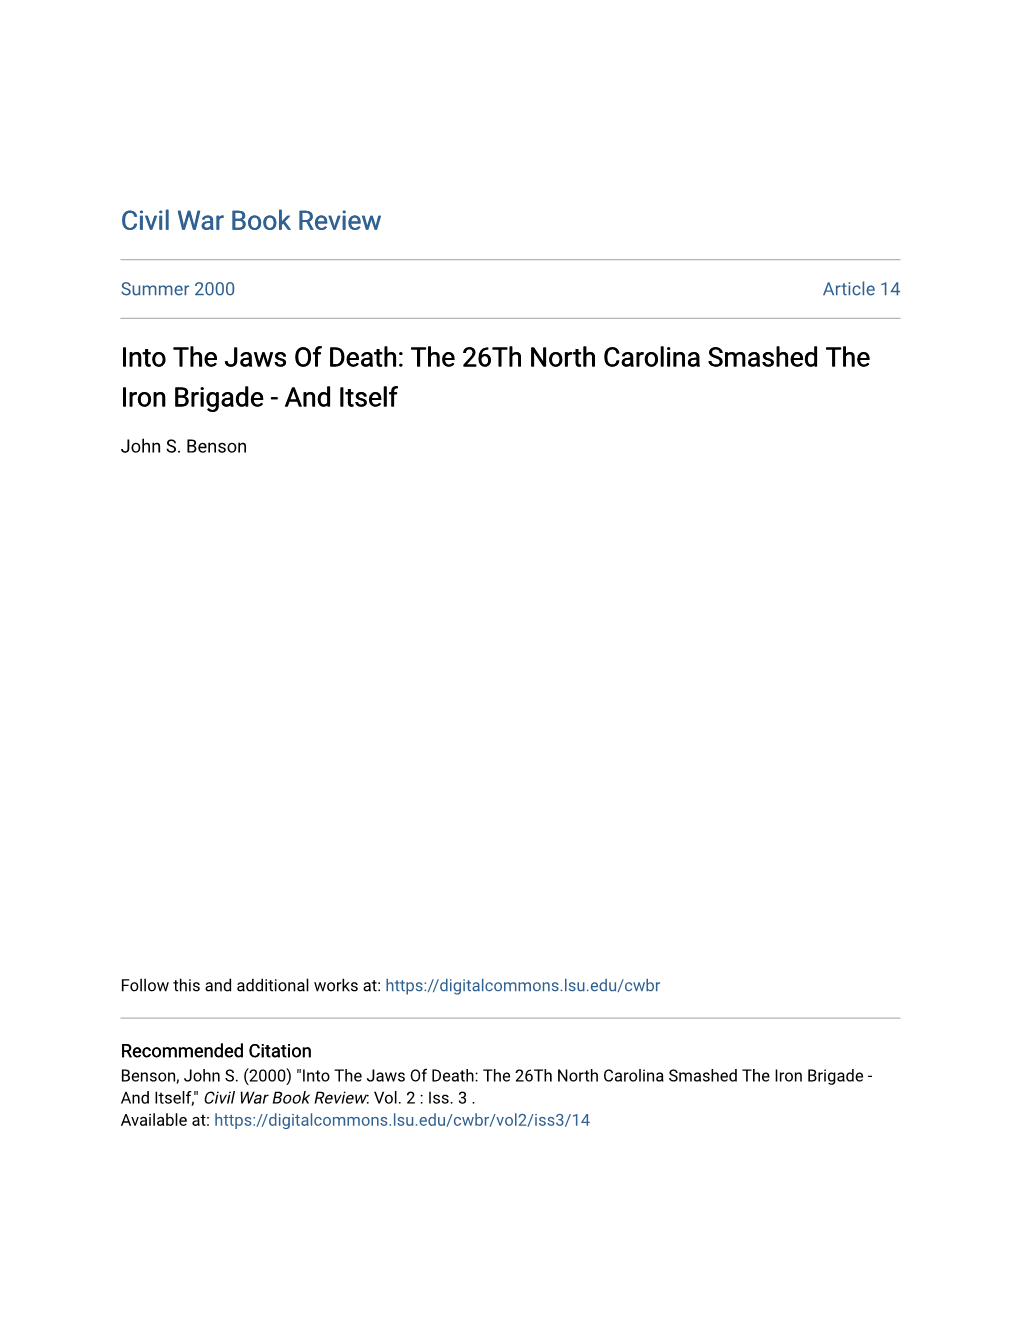 Into the Jaws of Death: the 26Th North Carolina Smashed the Iron Brigade - and Itself